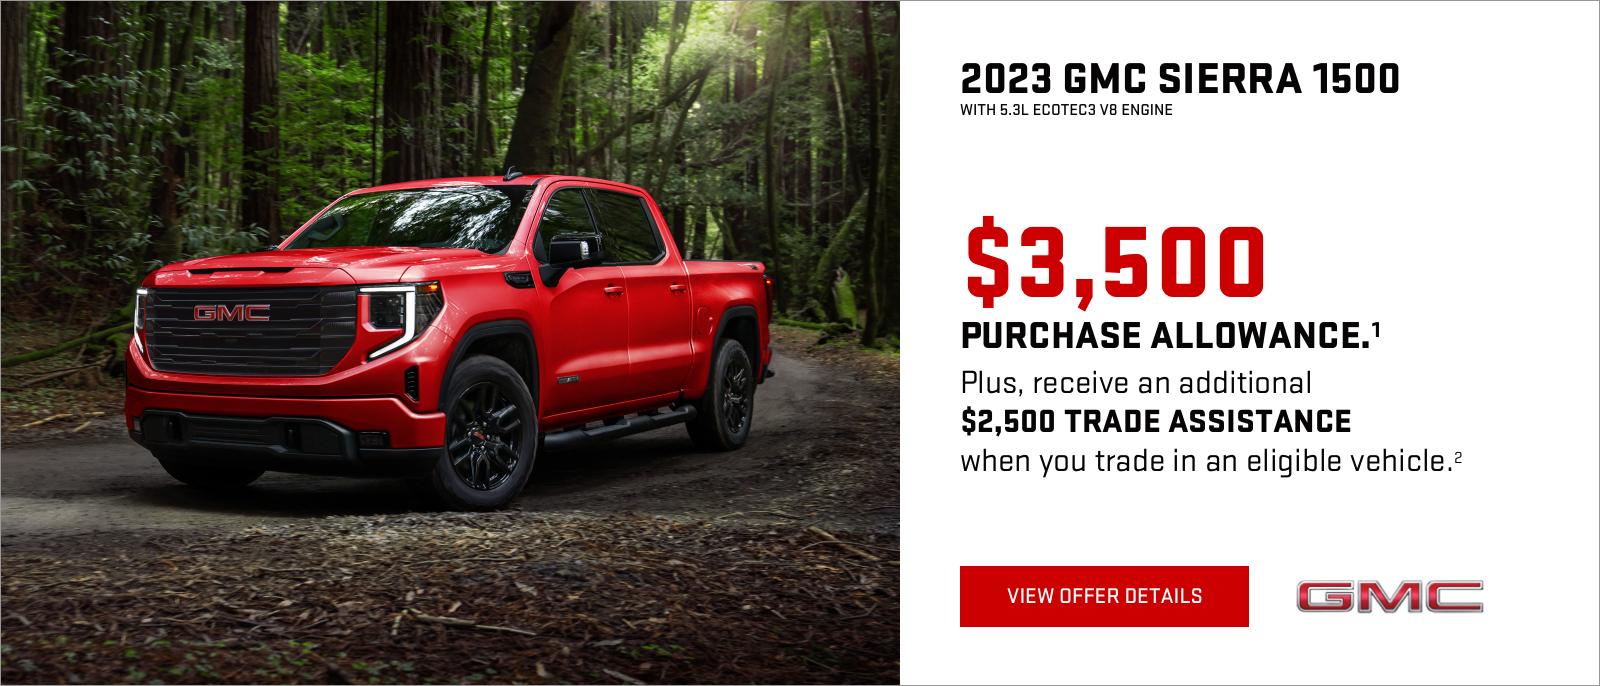 $3,500 PURCHASE ALLOWANCE.1

Plus, receive an additional $2,500 TRADE ASSISTANCE when you trade in an eligible vehicle.2